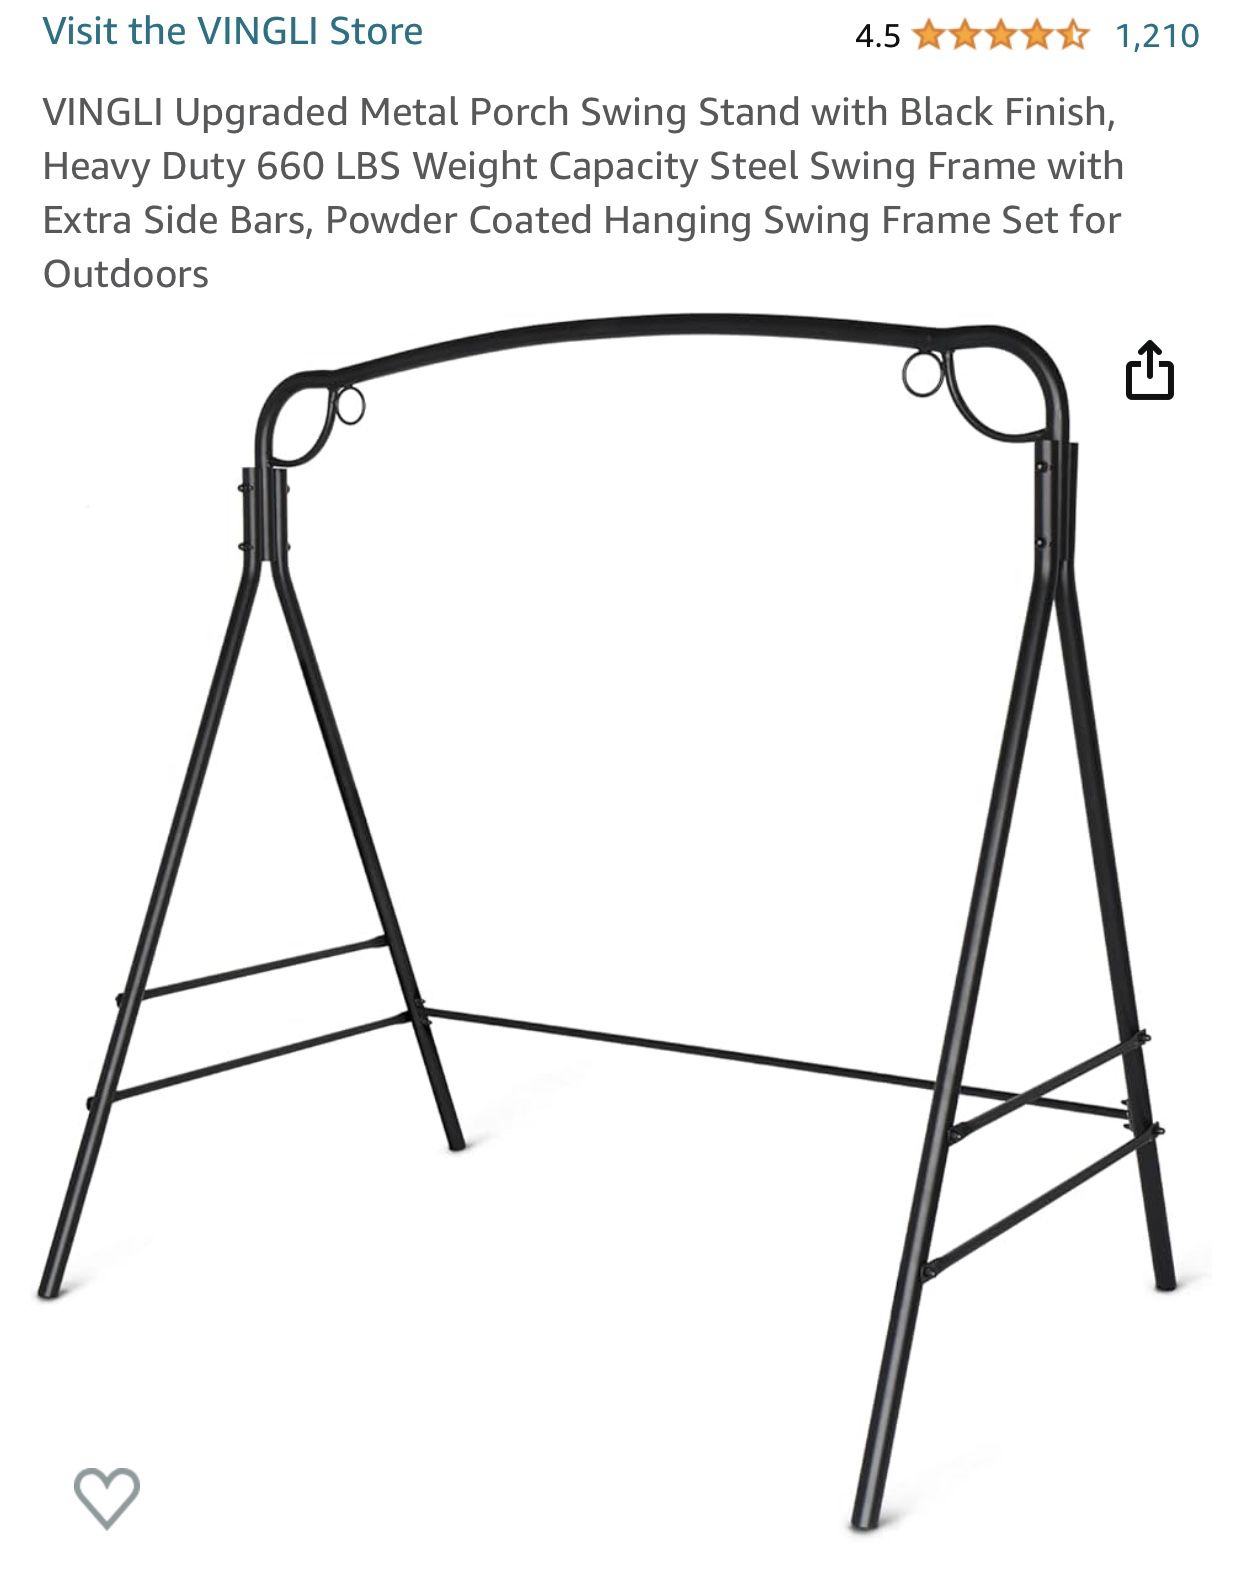 Metal Porch Swing Stand